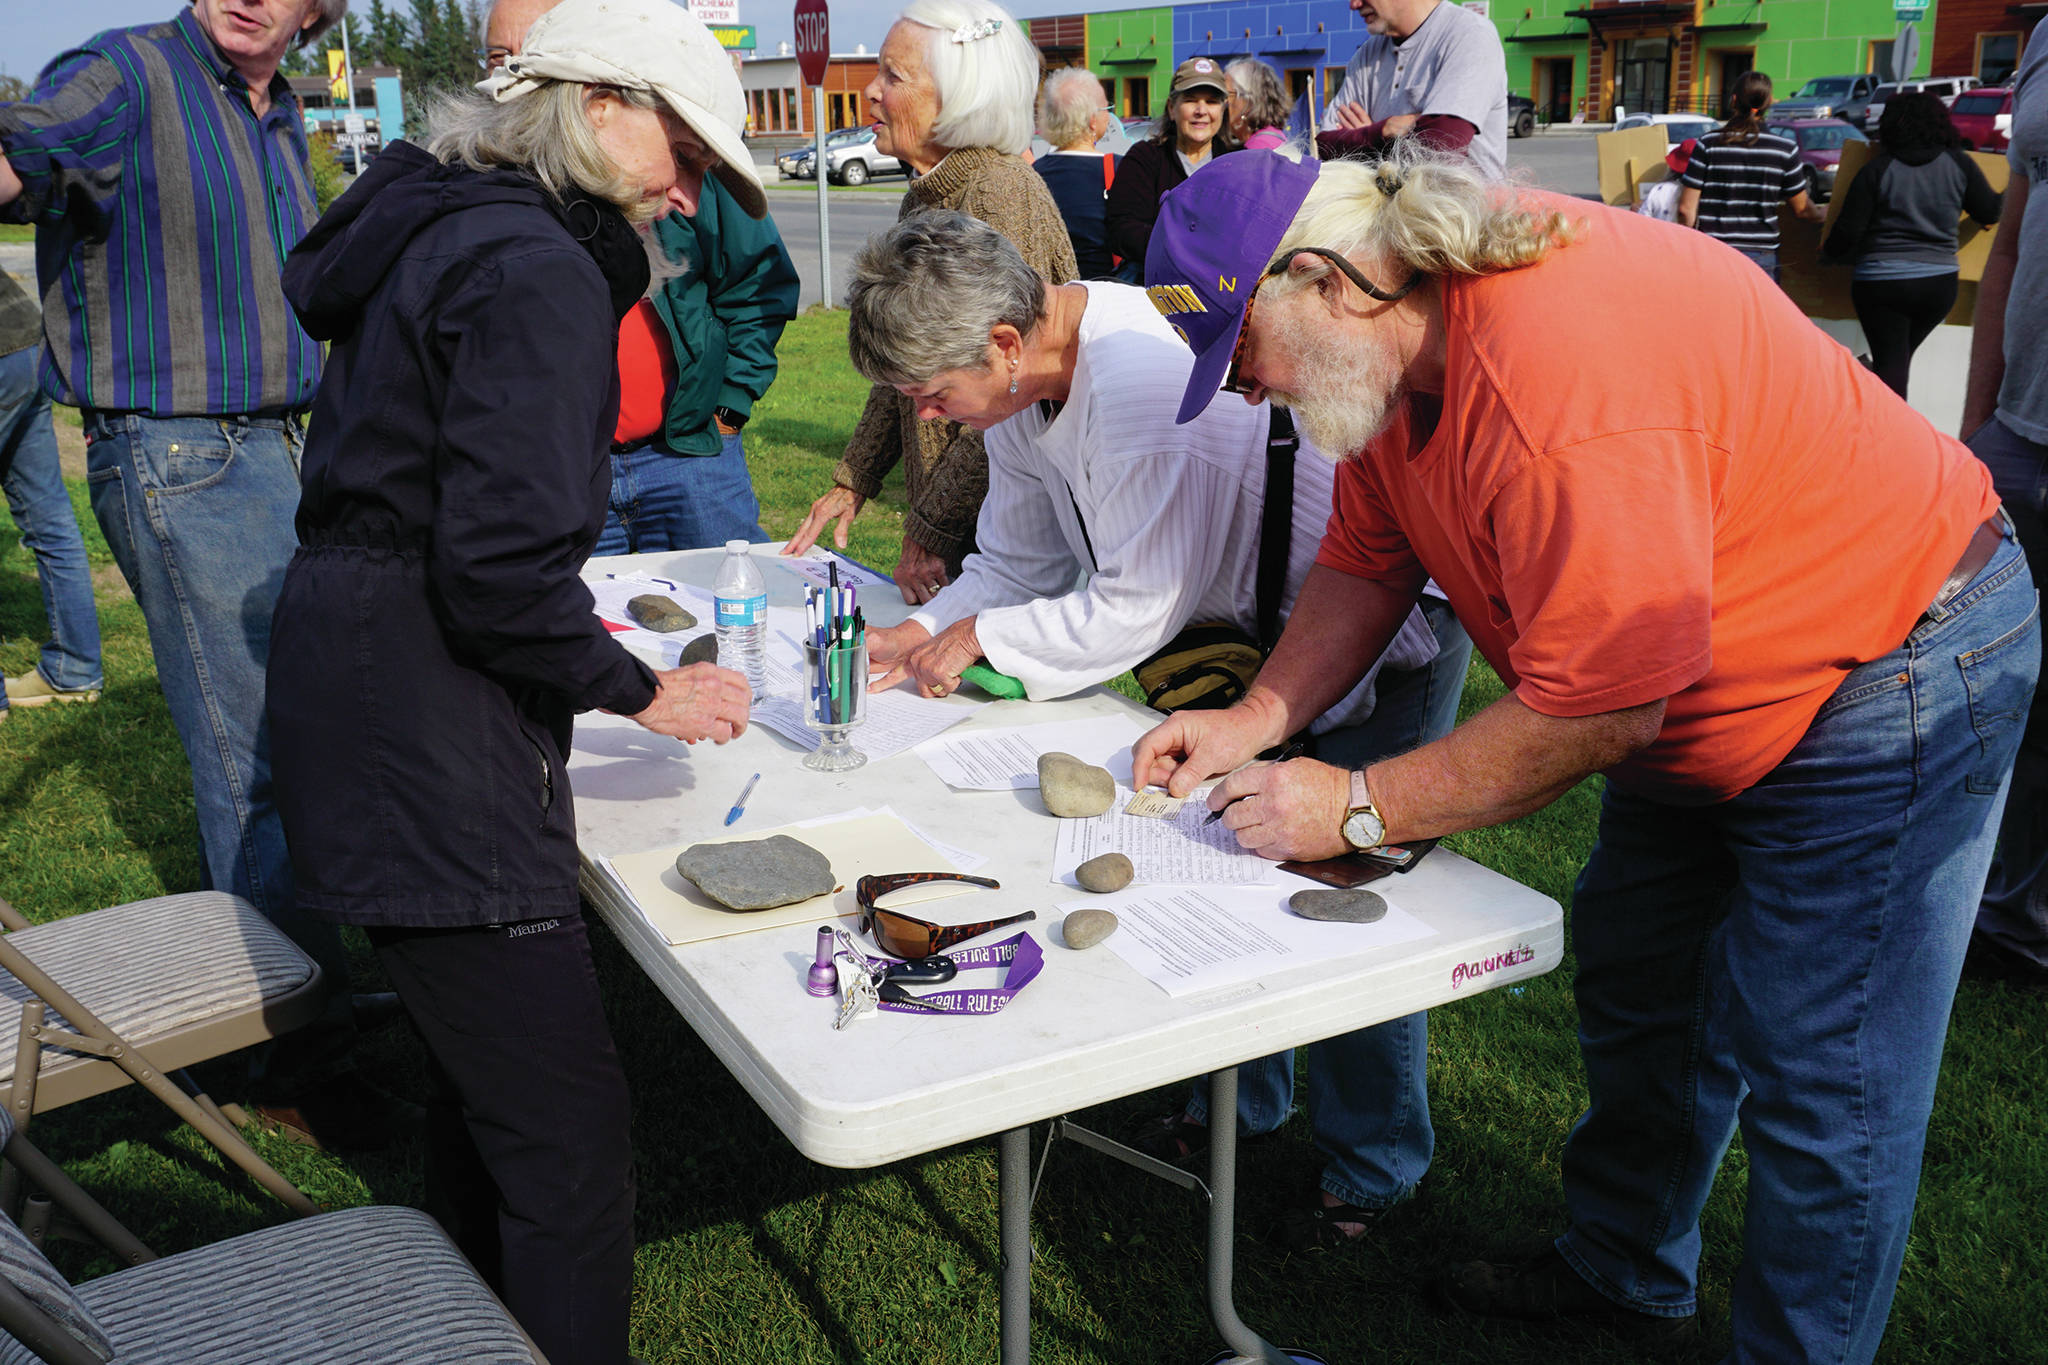 Recall Dunleavy organizer Kathy Carssow takes signatures at a Recall Dunleavy rally held on Aug. 1, 2019, at WKFL Park in Homer, Alaska. (Photo by Michael Armstrong)